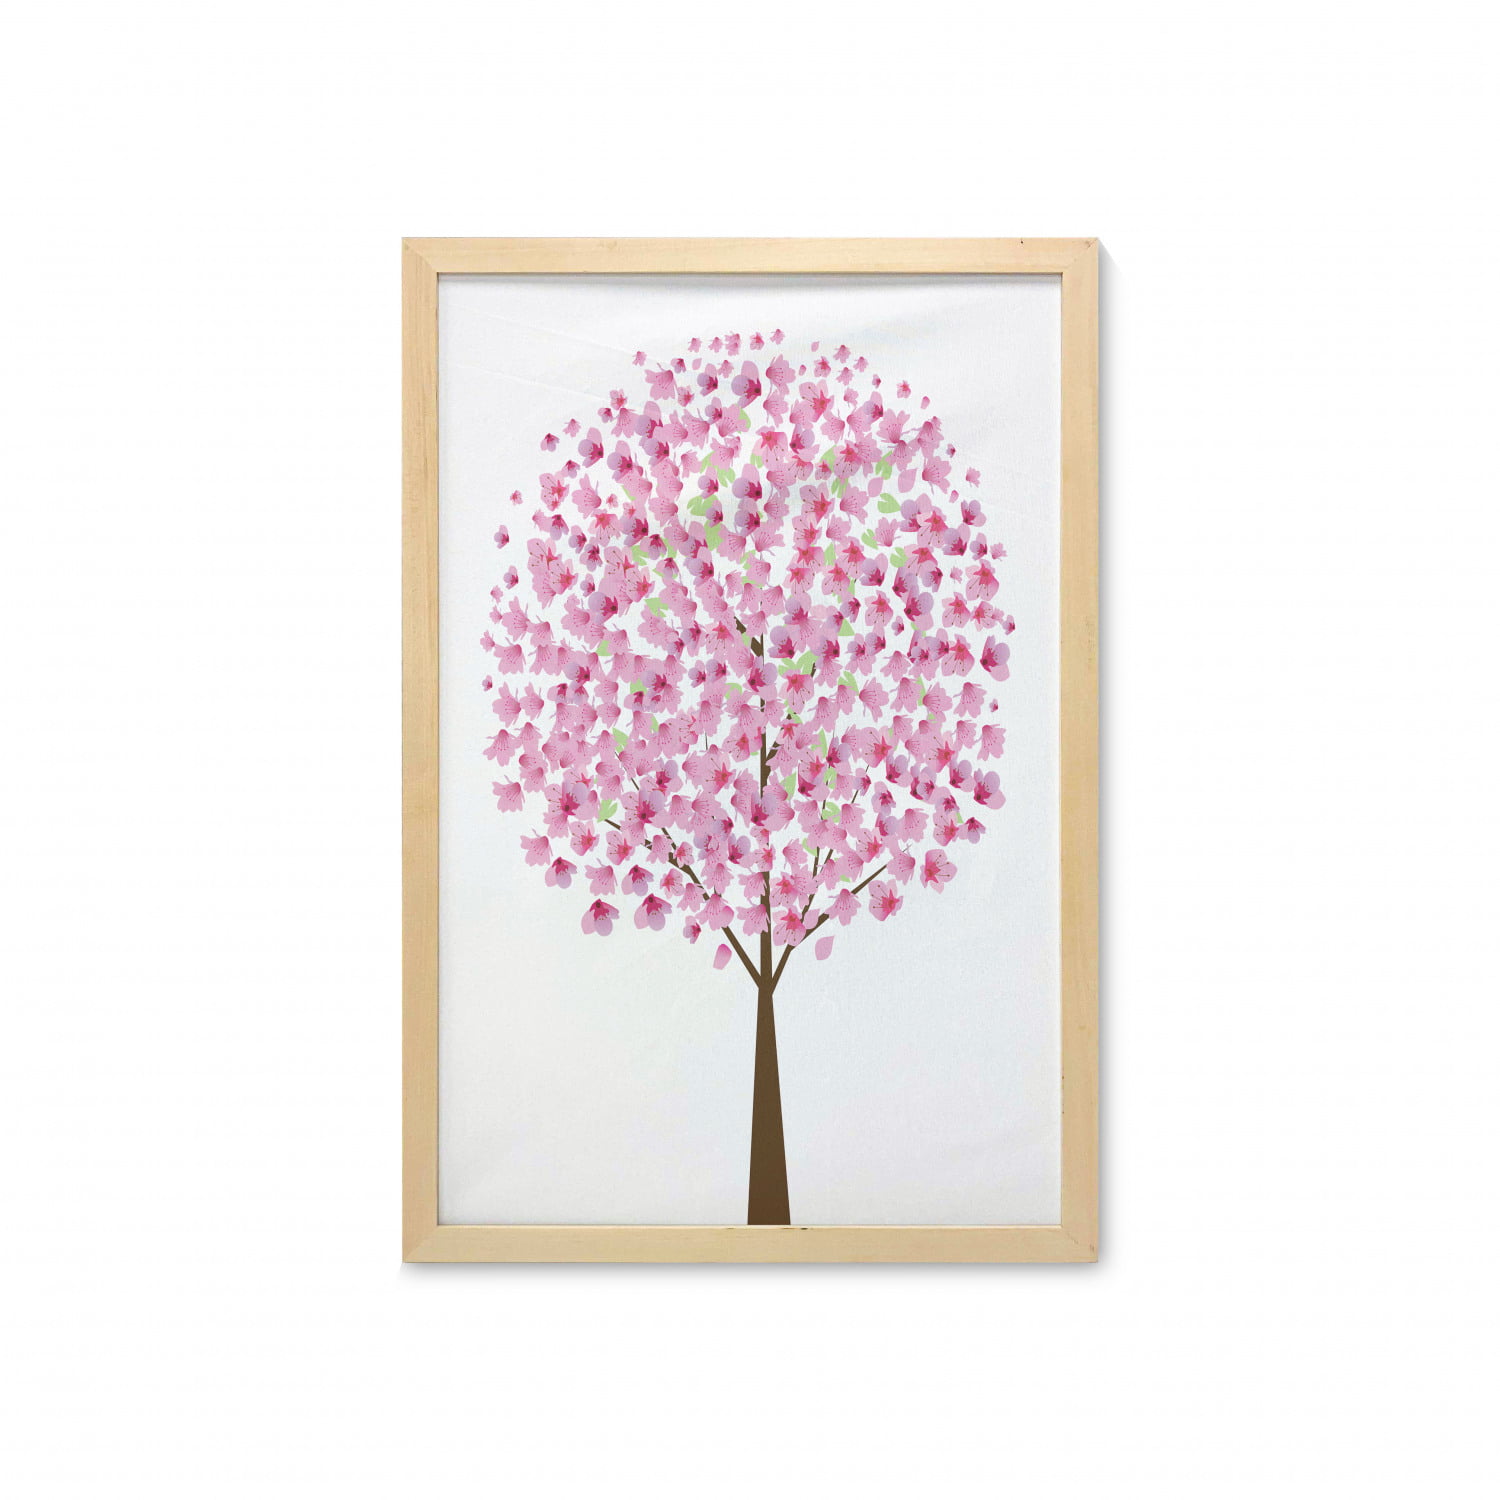 Japanese Pink Cherry Blossom Tree Large Framed Print Picture Poster Flowers 